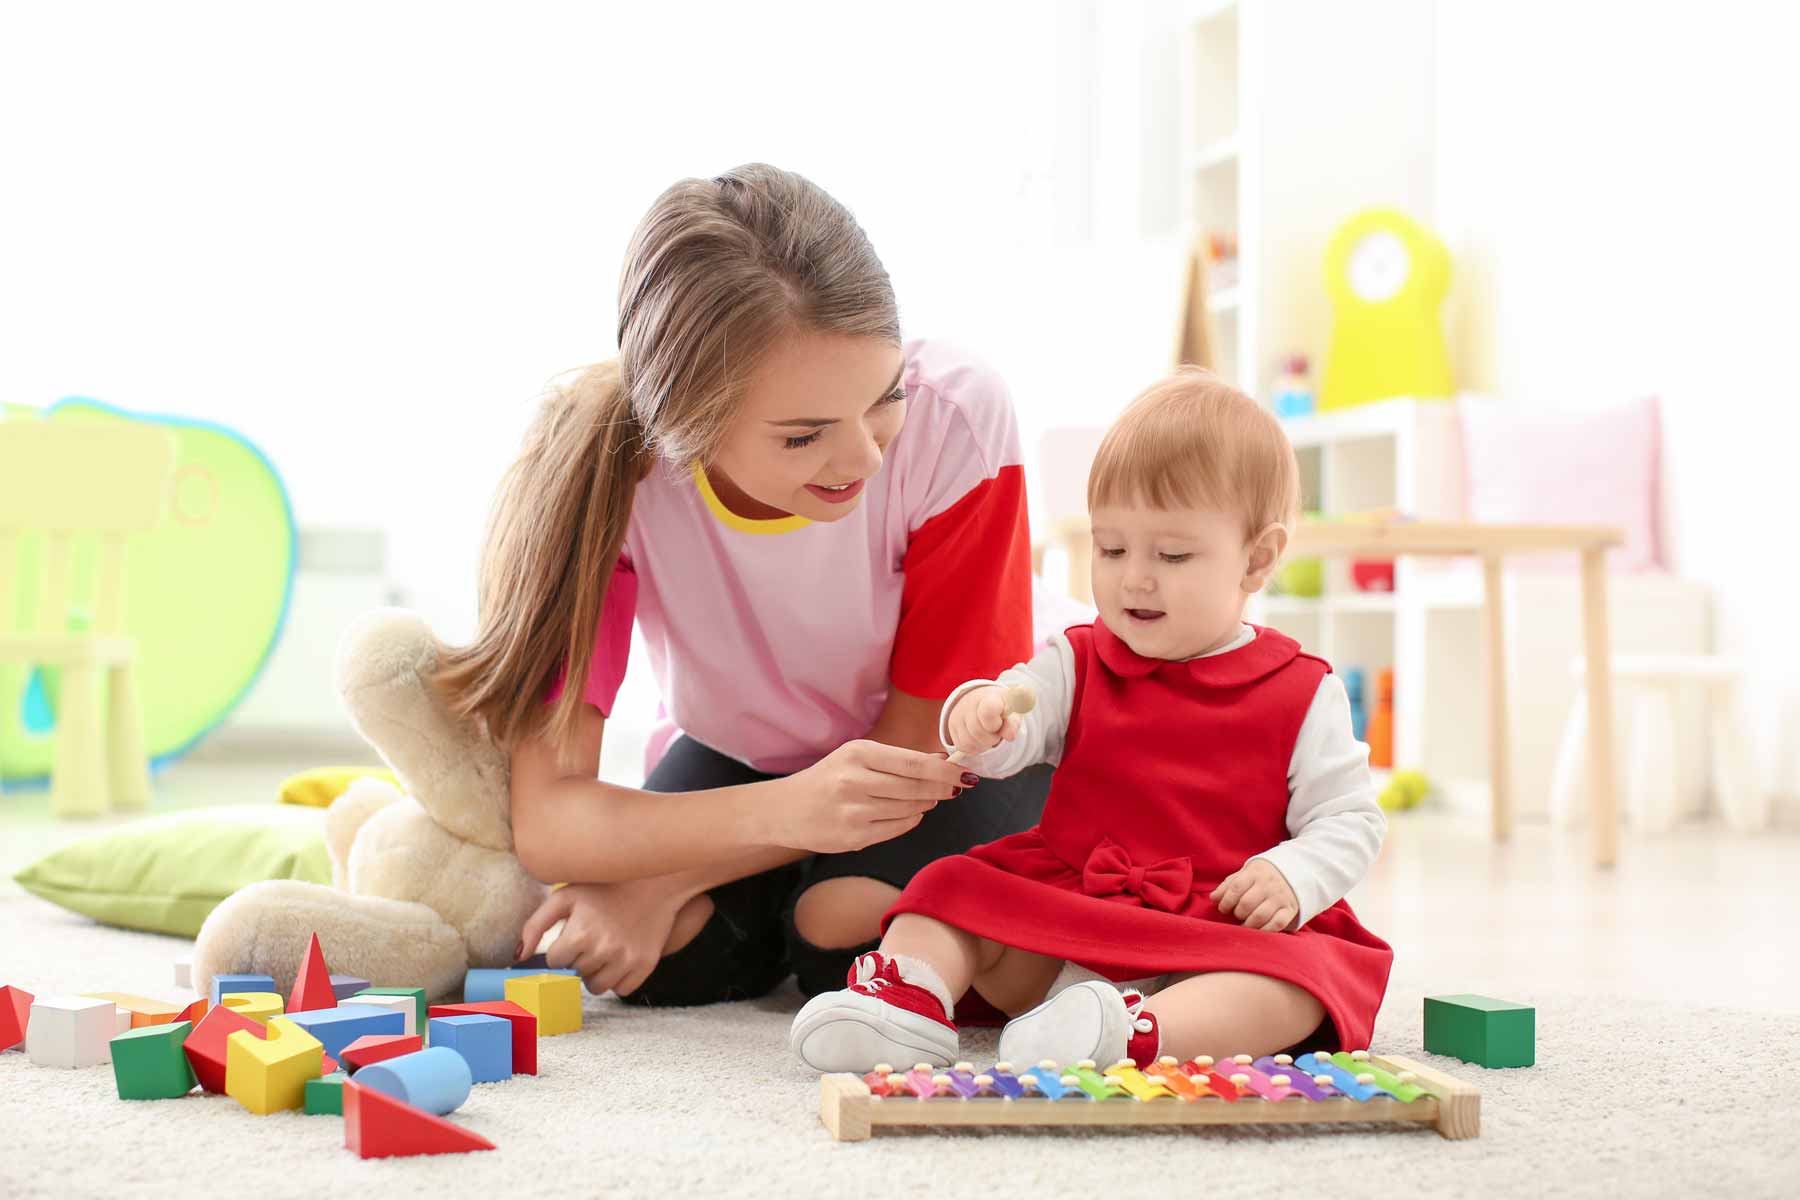 An au pair playing with a young child.